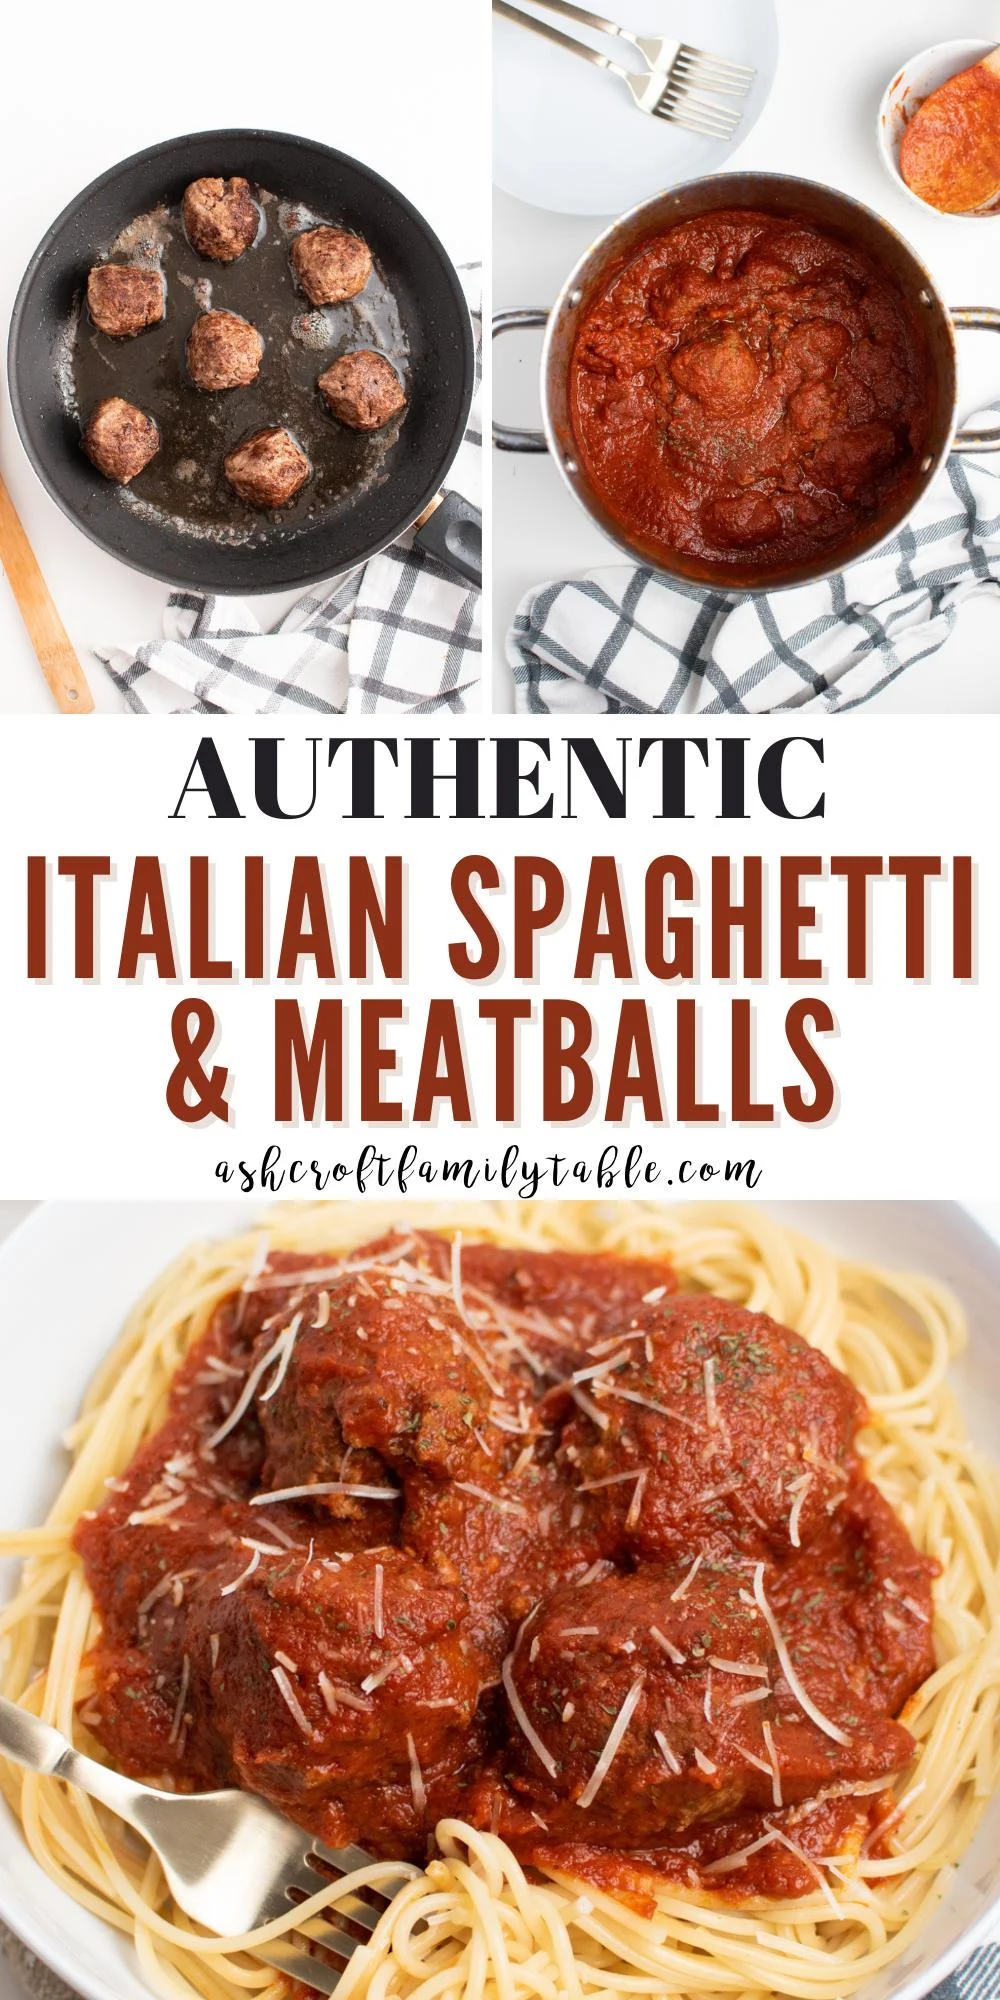 Make this authentic spaghetti and meatballs recipe for dinner tonight!